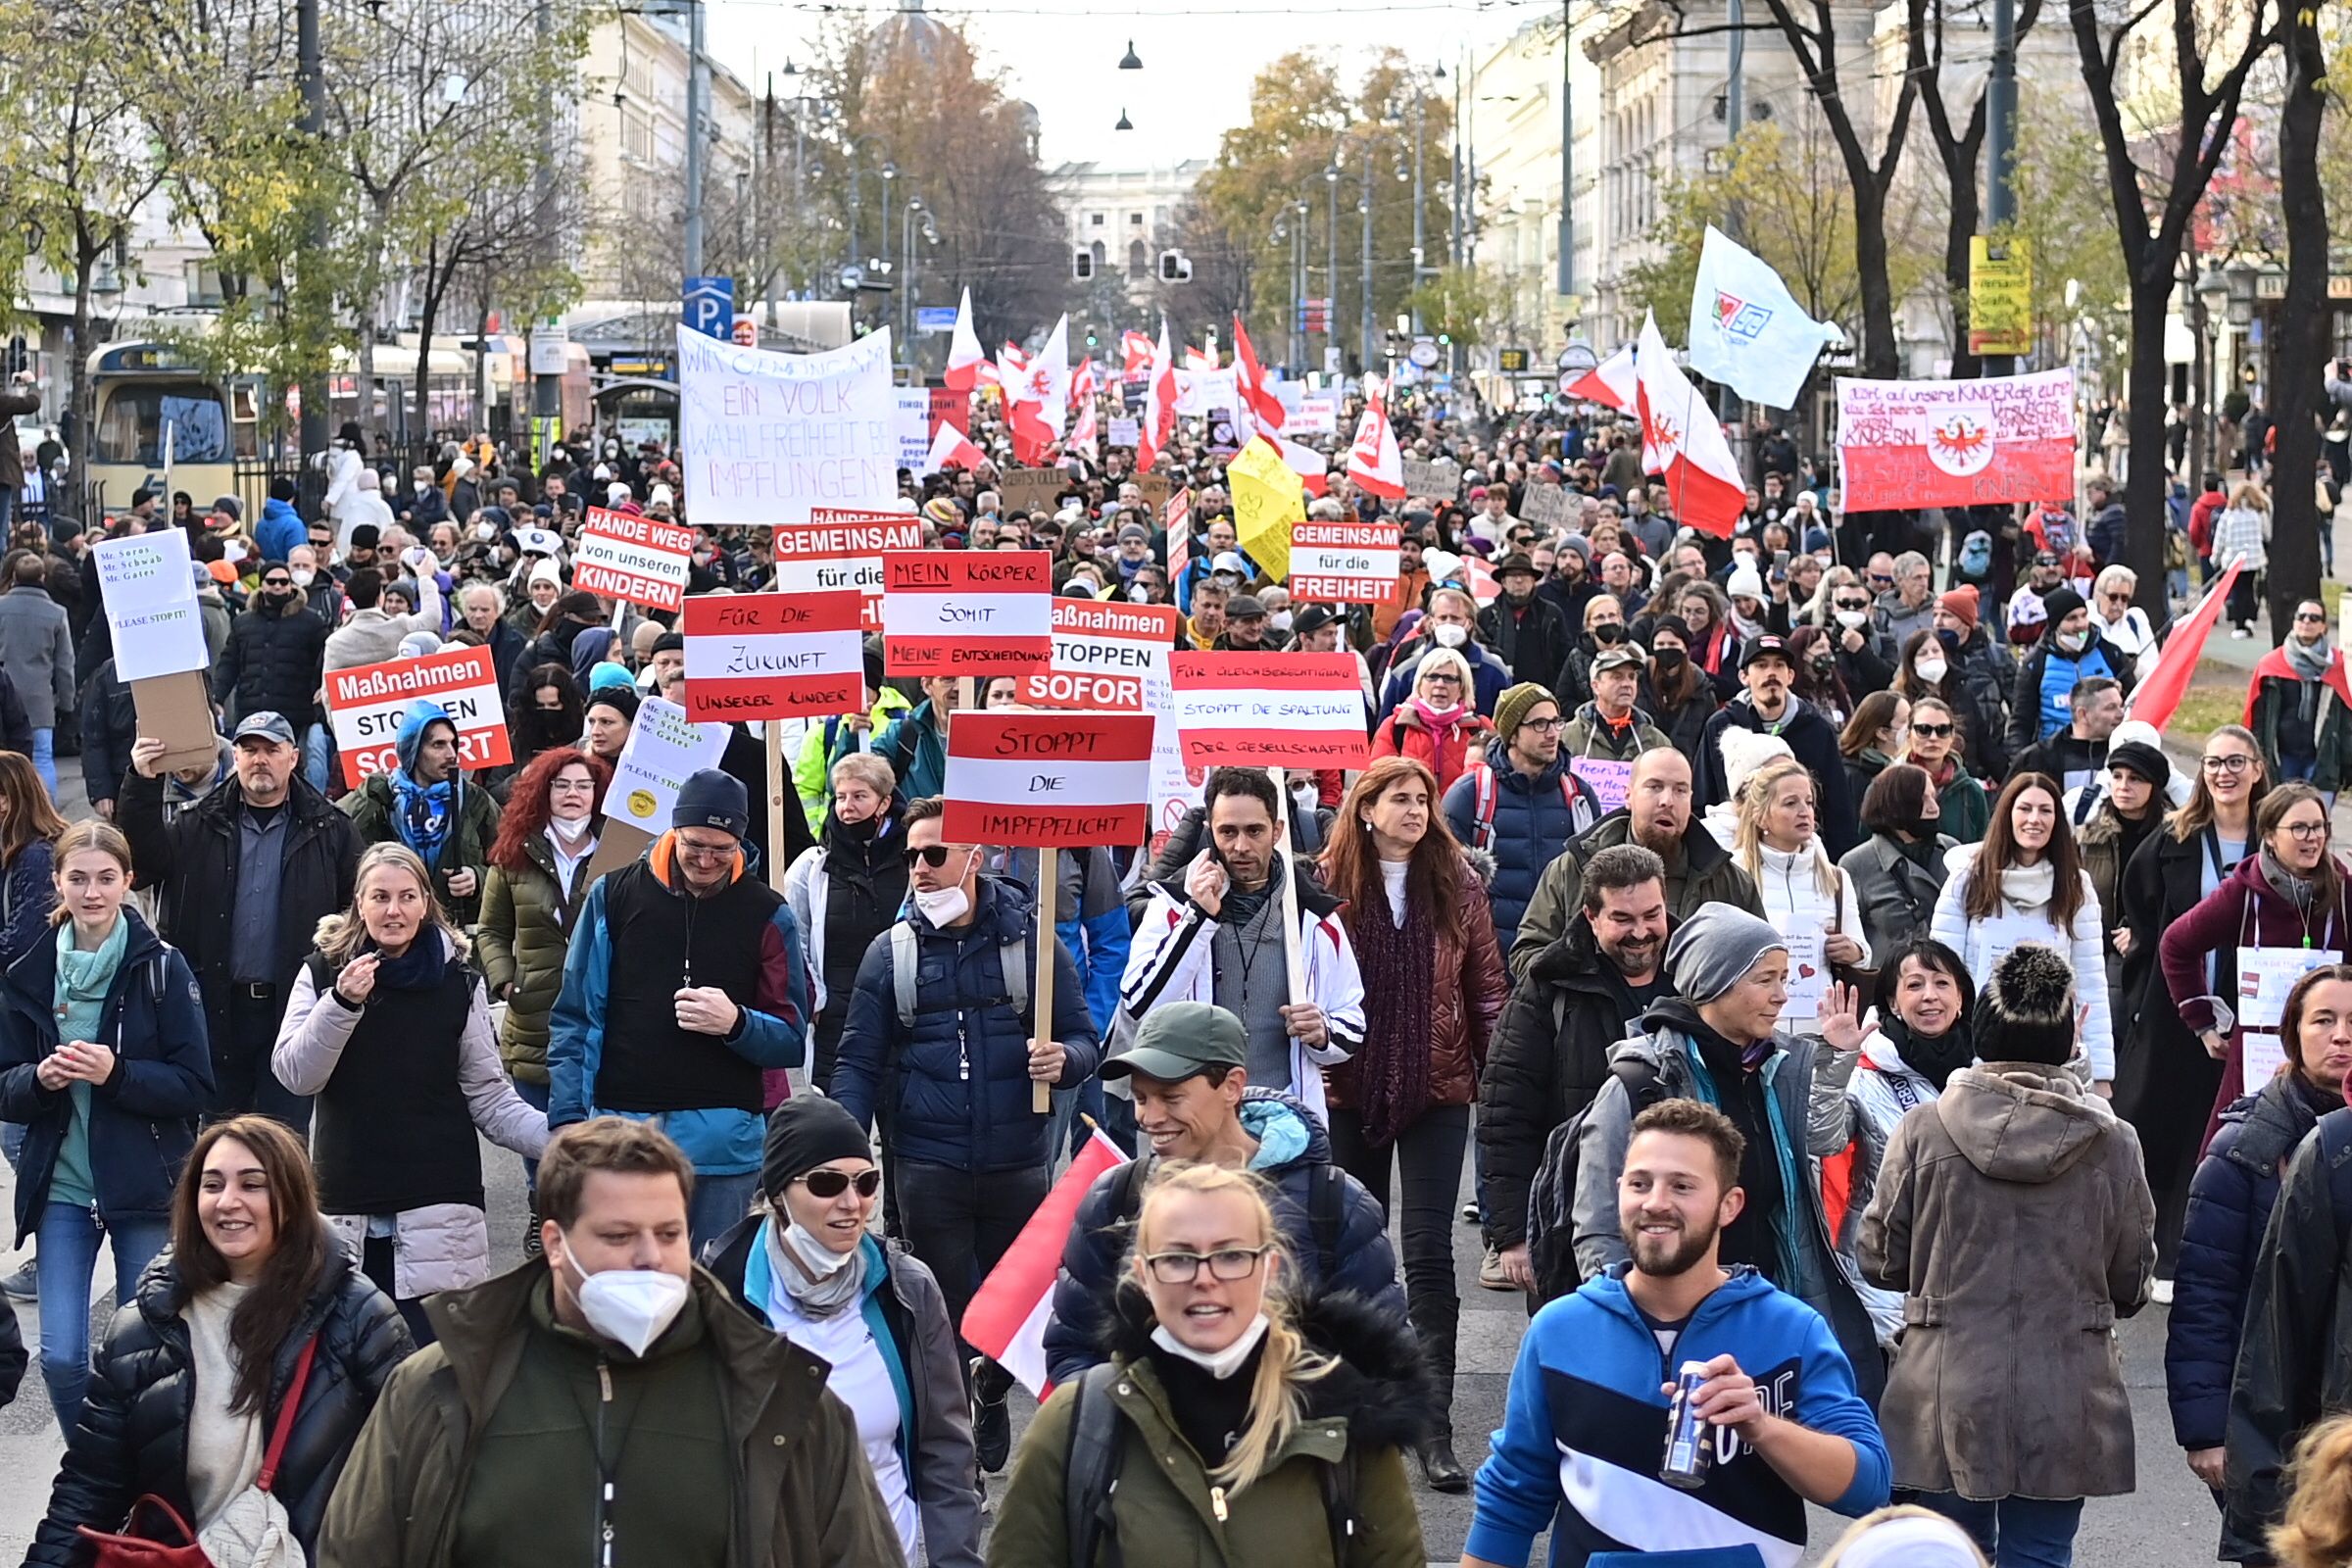 Demonstrators take part in a rally held by Austria's far-right Freedom Party FPOe against the measures taken to curb the coronavirus (Covid-19) pandemic, at Maria Theresien Platz square in Vienna, Austria on November 20, 2021. - Austria will impose a lockdown for all and make vaccinations mandatory, Austria's Chancellor Schallenberg announced on November 19, making the country the first in the EU to take such stringent measures as coronavirus cases spiral. The Alpine nation plans to make Covid-19 vaccinations mandatory from February 1 next year, while the lockdown will start from Monday, November 22 and will be evaluated after 10 days. (Photo by Joe Klamar / AFP) (Photo by JOE KLAMAR/AFP via Getty Images)